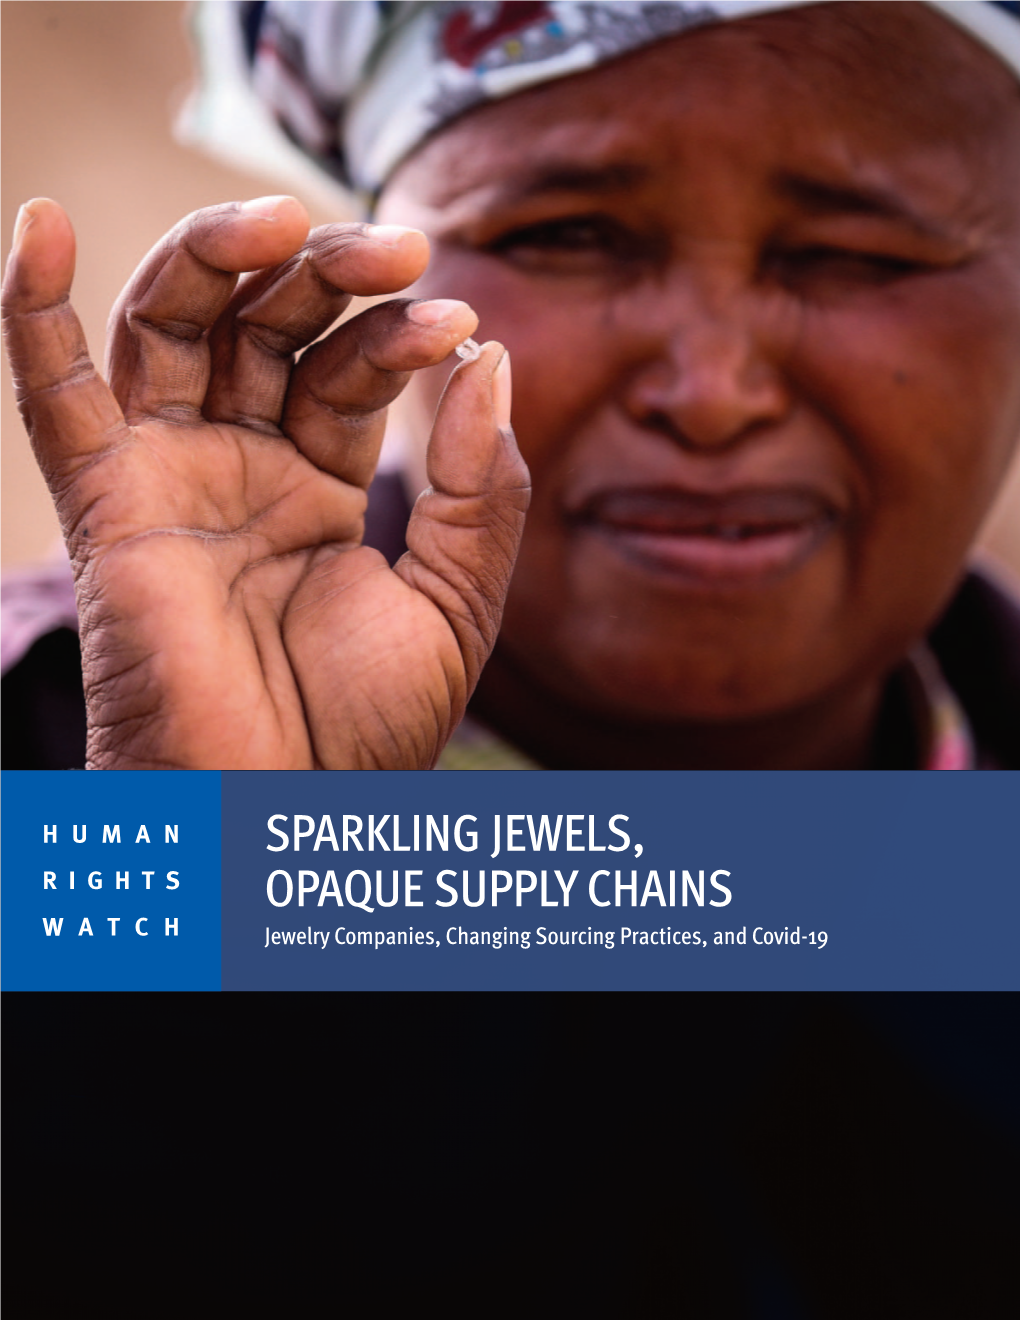 Sparkling Jewels, Opaque Supply Chains Jewelry Companies, Changing Sourcing Practices, and Covid-19